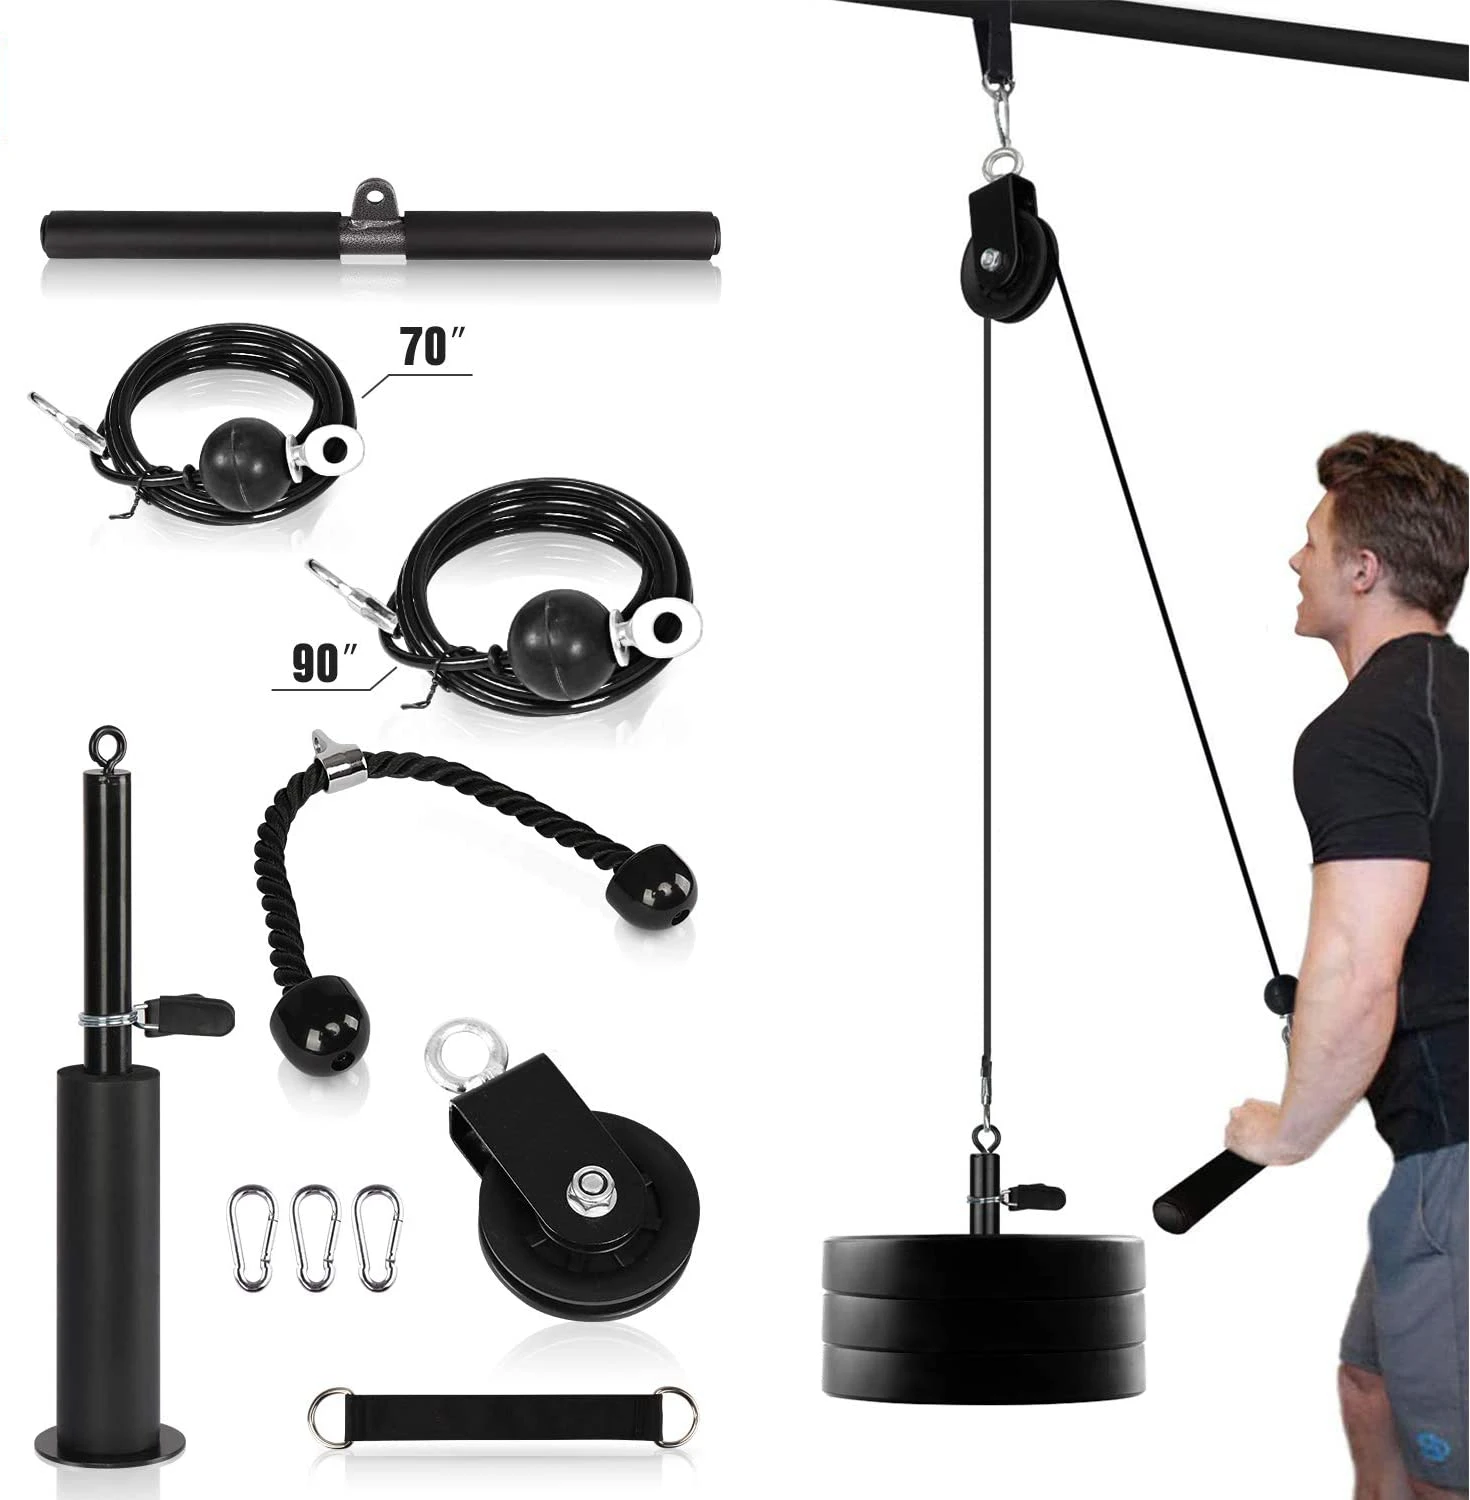 

Upgraded Loading Pin for Triceps Pull Down Shoulder-Home Gym Equipment Profession System Fitness LAT and Lift Pulley System, Black